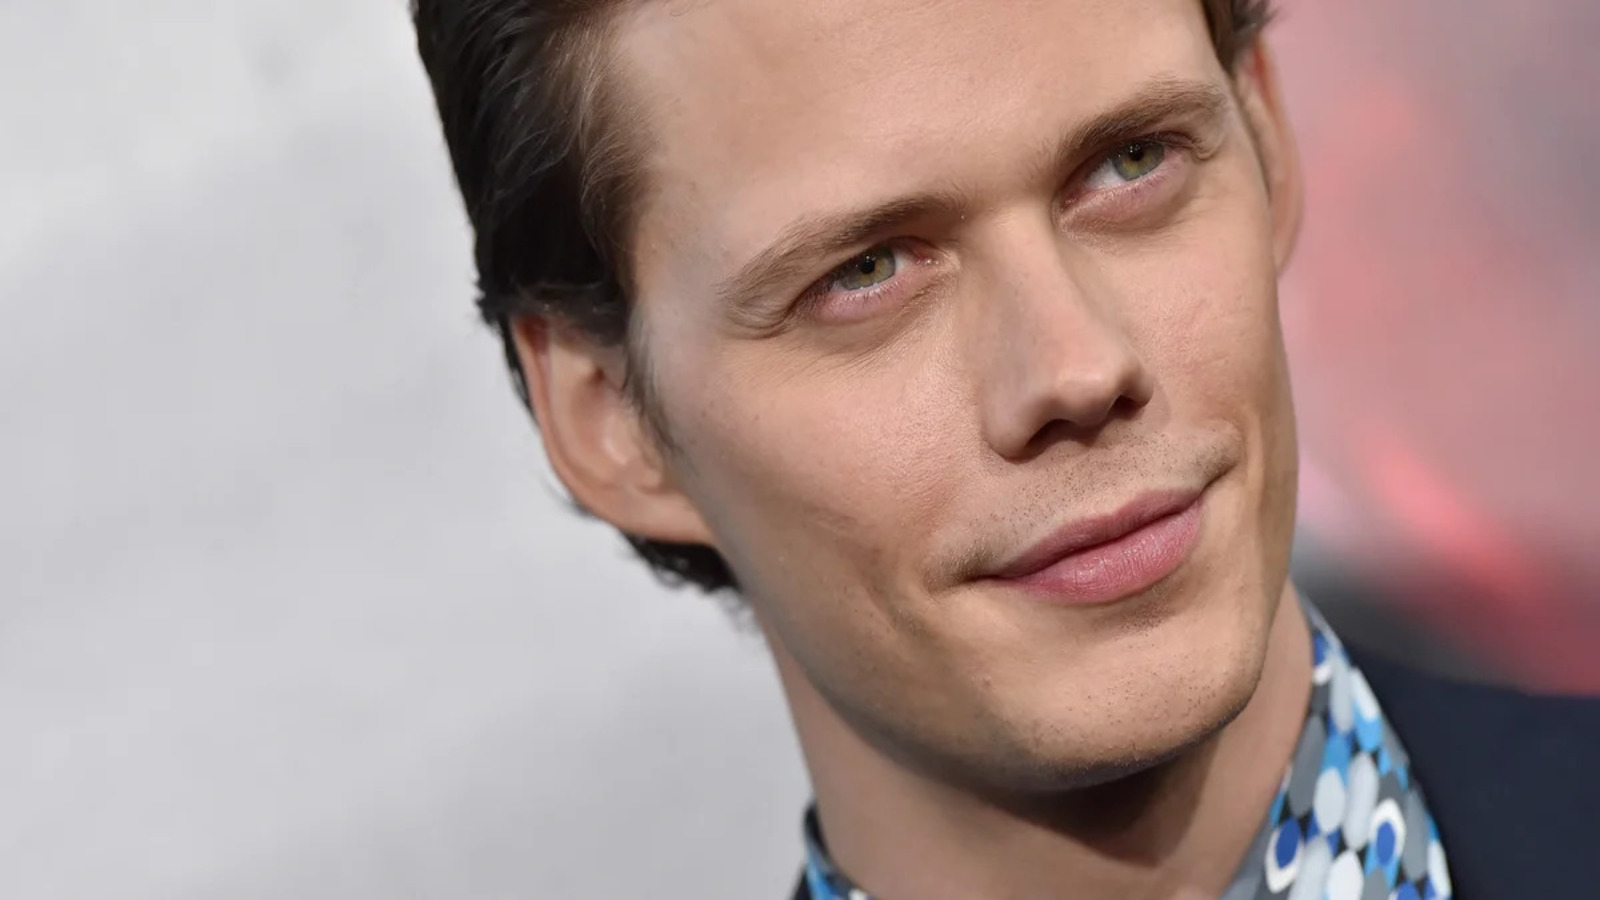 Welcome to Derry, Bill Skarsgård will be in the IT prequel series?  Actor's response